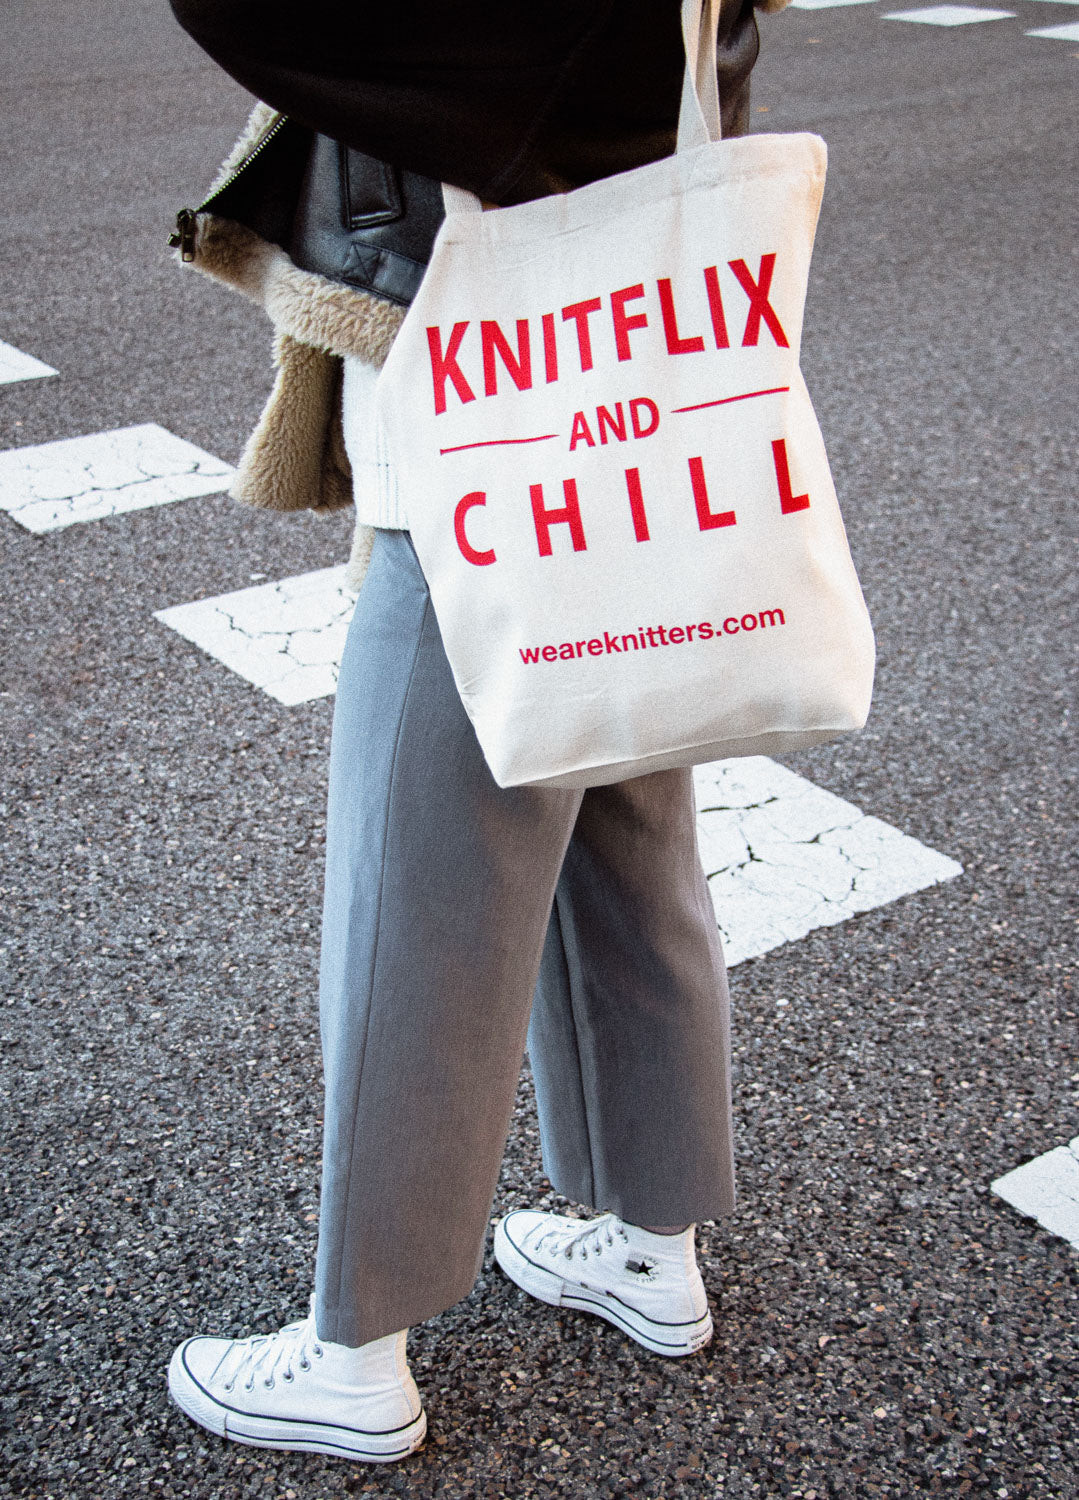 Tote Bag: Knitflix & Chill – We are knitters